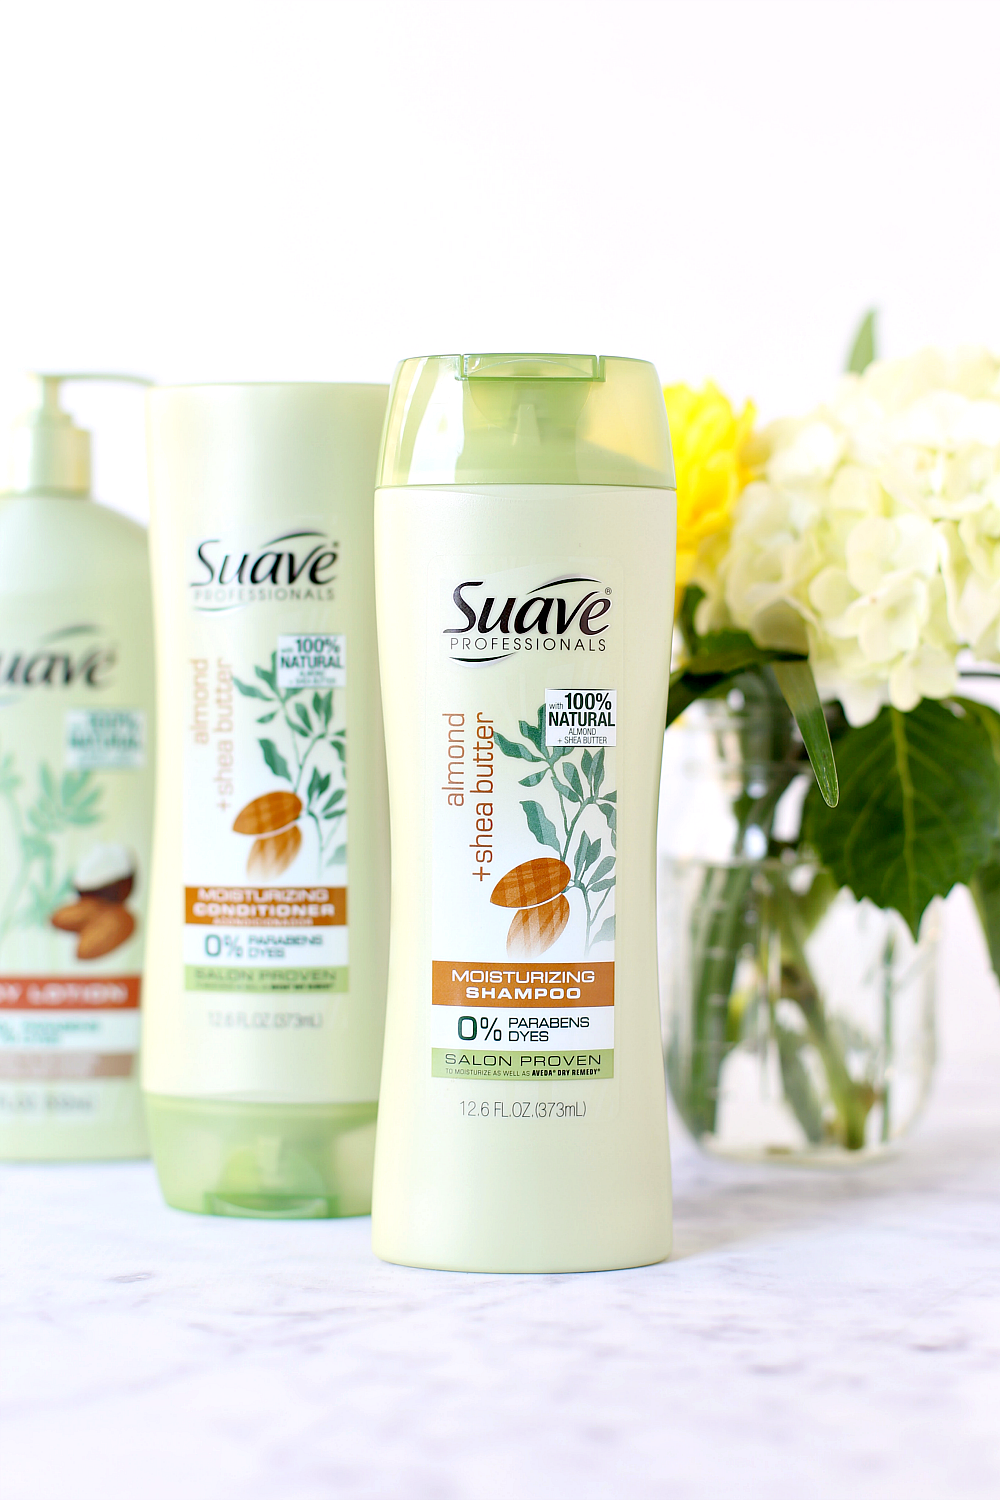 Go Natural this Summer & Save with Suave Green Products